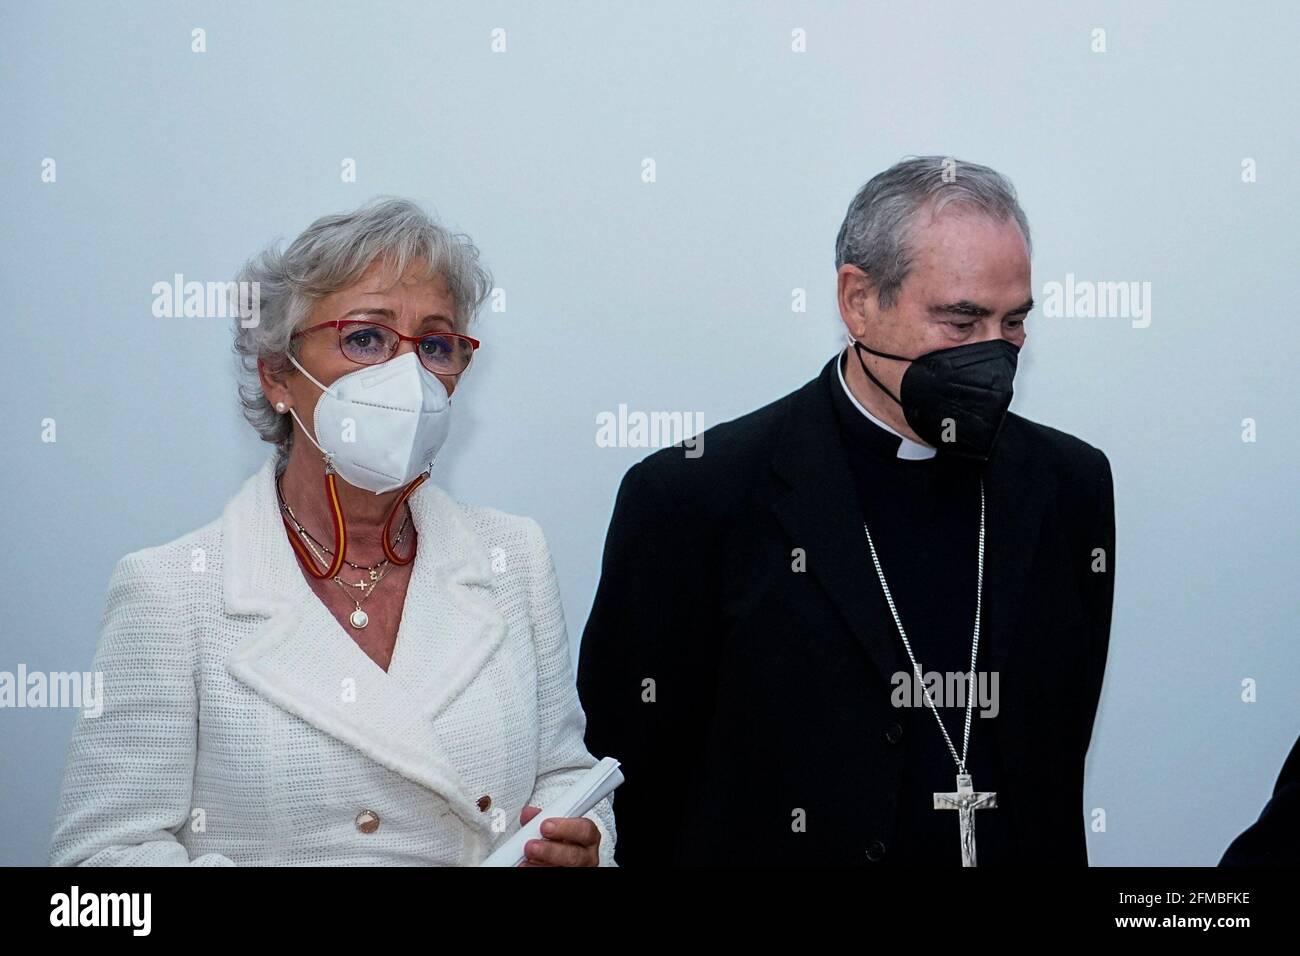 Malaga, Spain. 07th May, 2021. Council of Malaga City Hall, Teresa Porras and Malaga Bishop, Jesus Catala Ibañez seen during the exhibition at Centro Cultural Fundacion Unicaja.'Un siglo de esplendor' is an exhibition that shows the artistic heritage of the Holy Week brotherhoods of Malaga and is one of the events organized by Agrupacion de Cofradias de Semana Santa de Malaga for the centenary of the institution. Credit: SOPA Images Limited/Alamy Live News Stock Photo